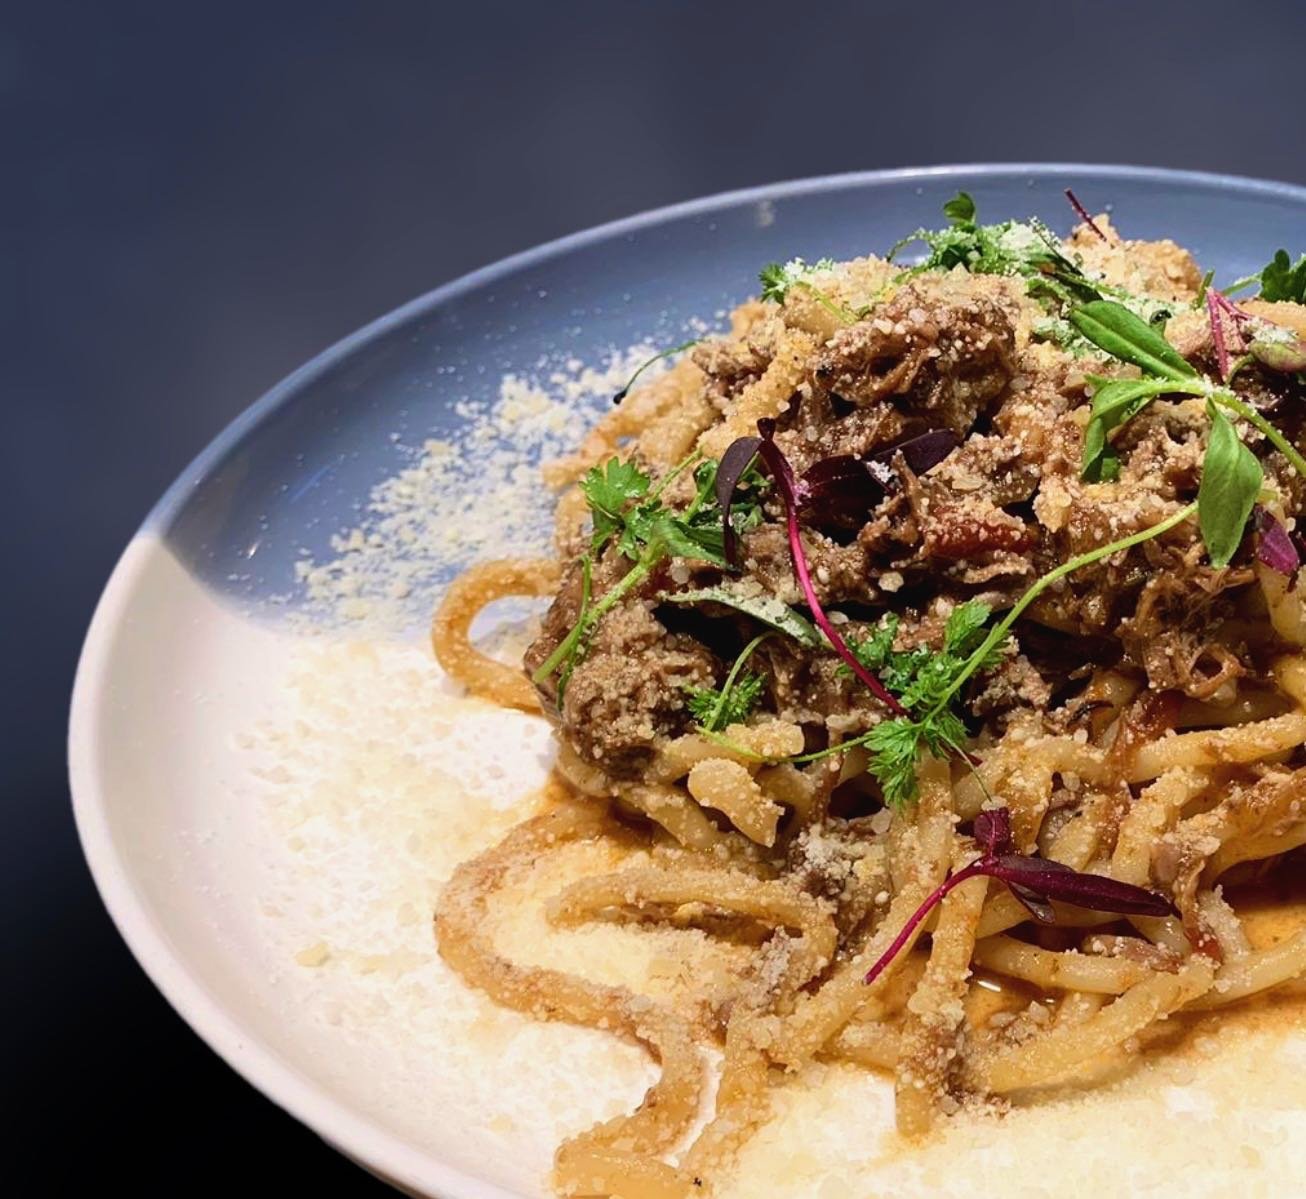 One of our most popular specials is back for the week: Lamb Ragout Bucatini